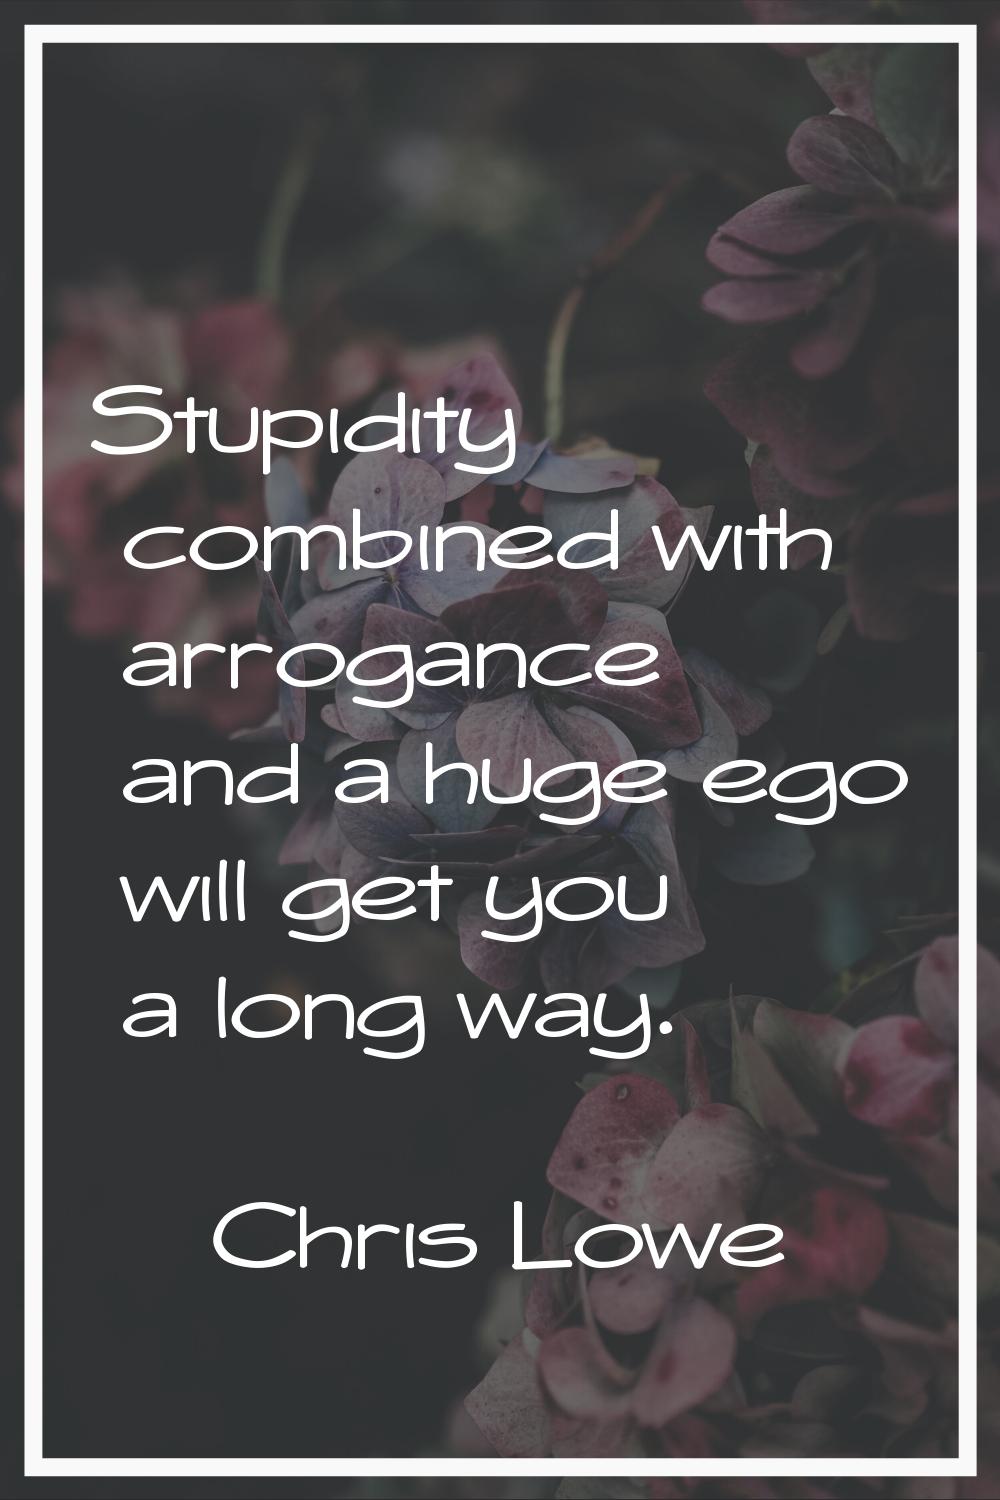 Stupidity combined with arrogance and a huge ego will get you a long way.